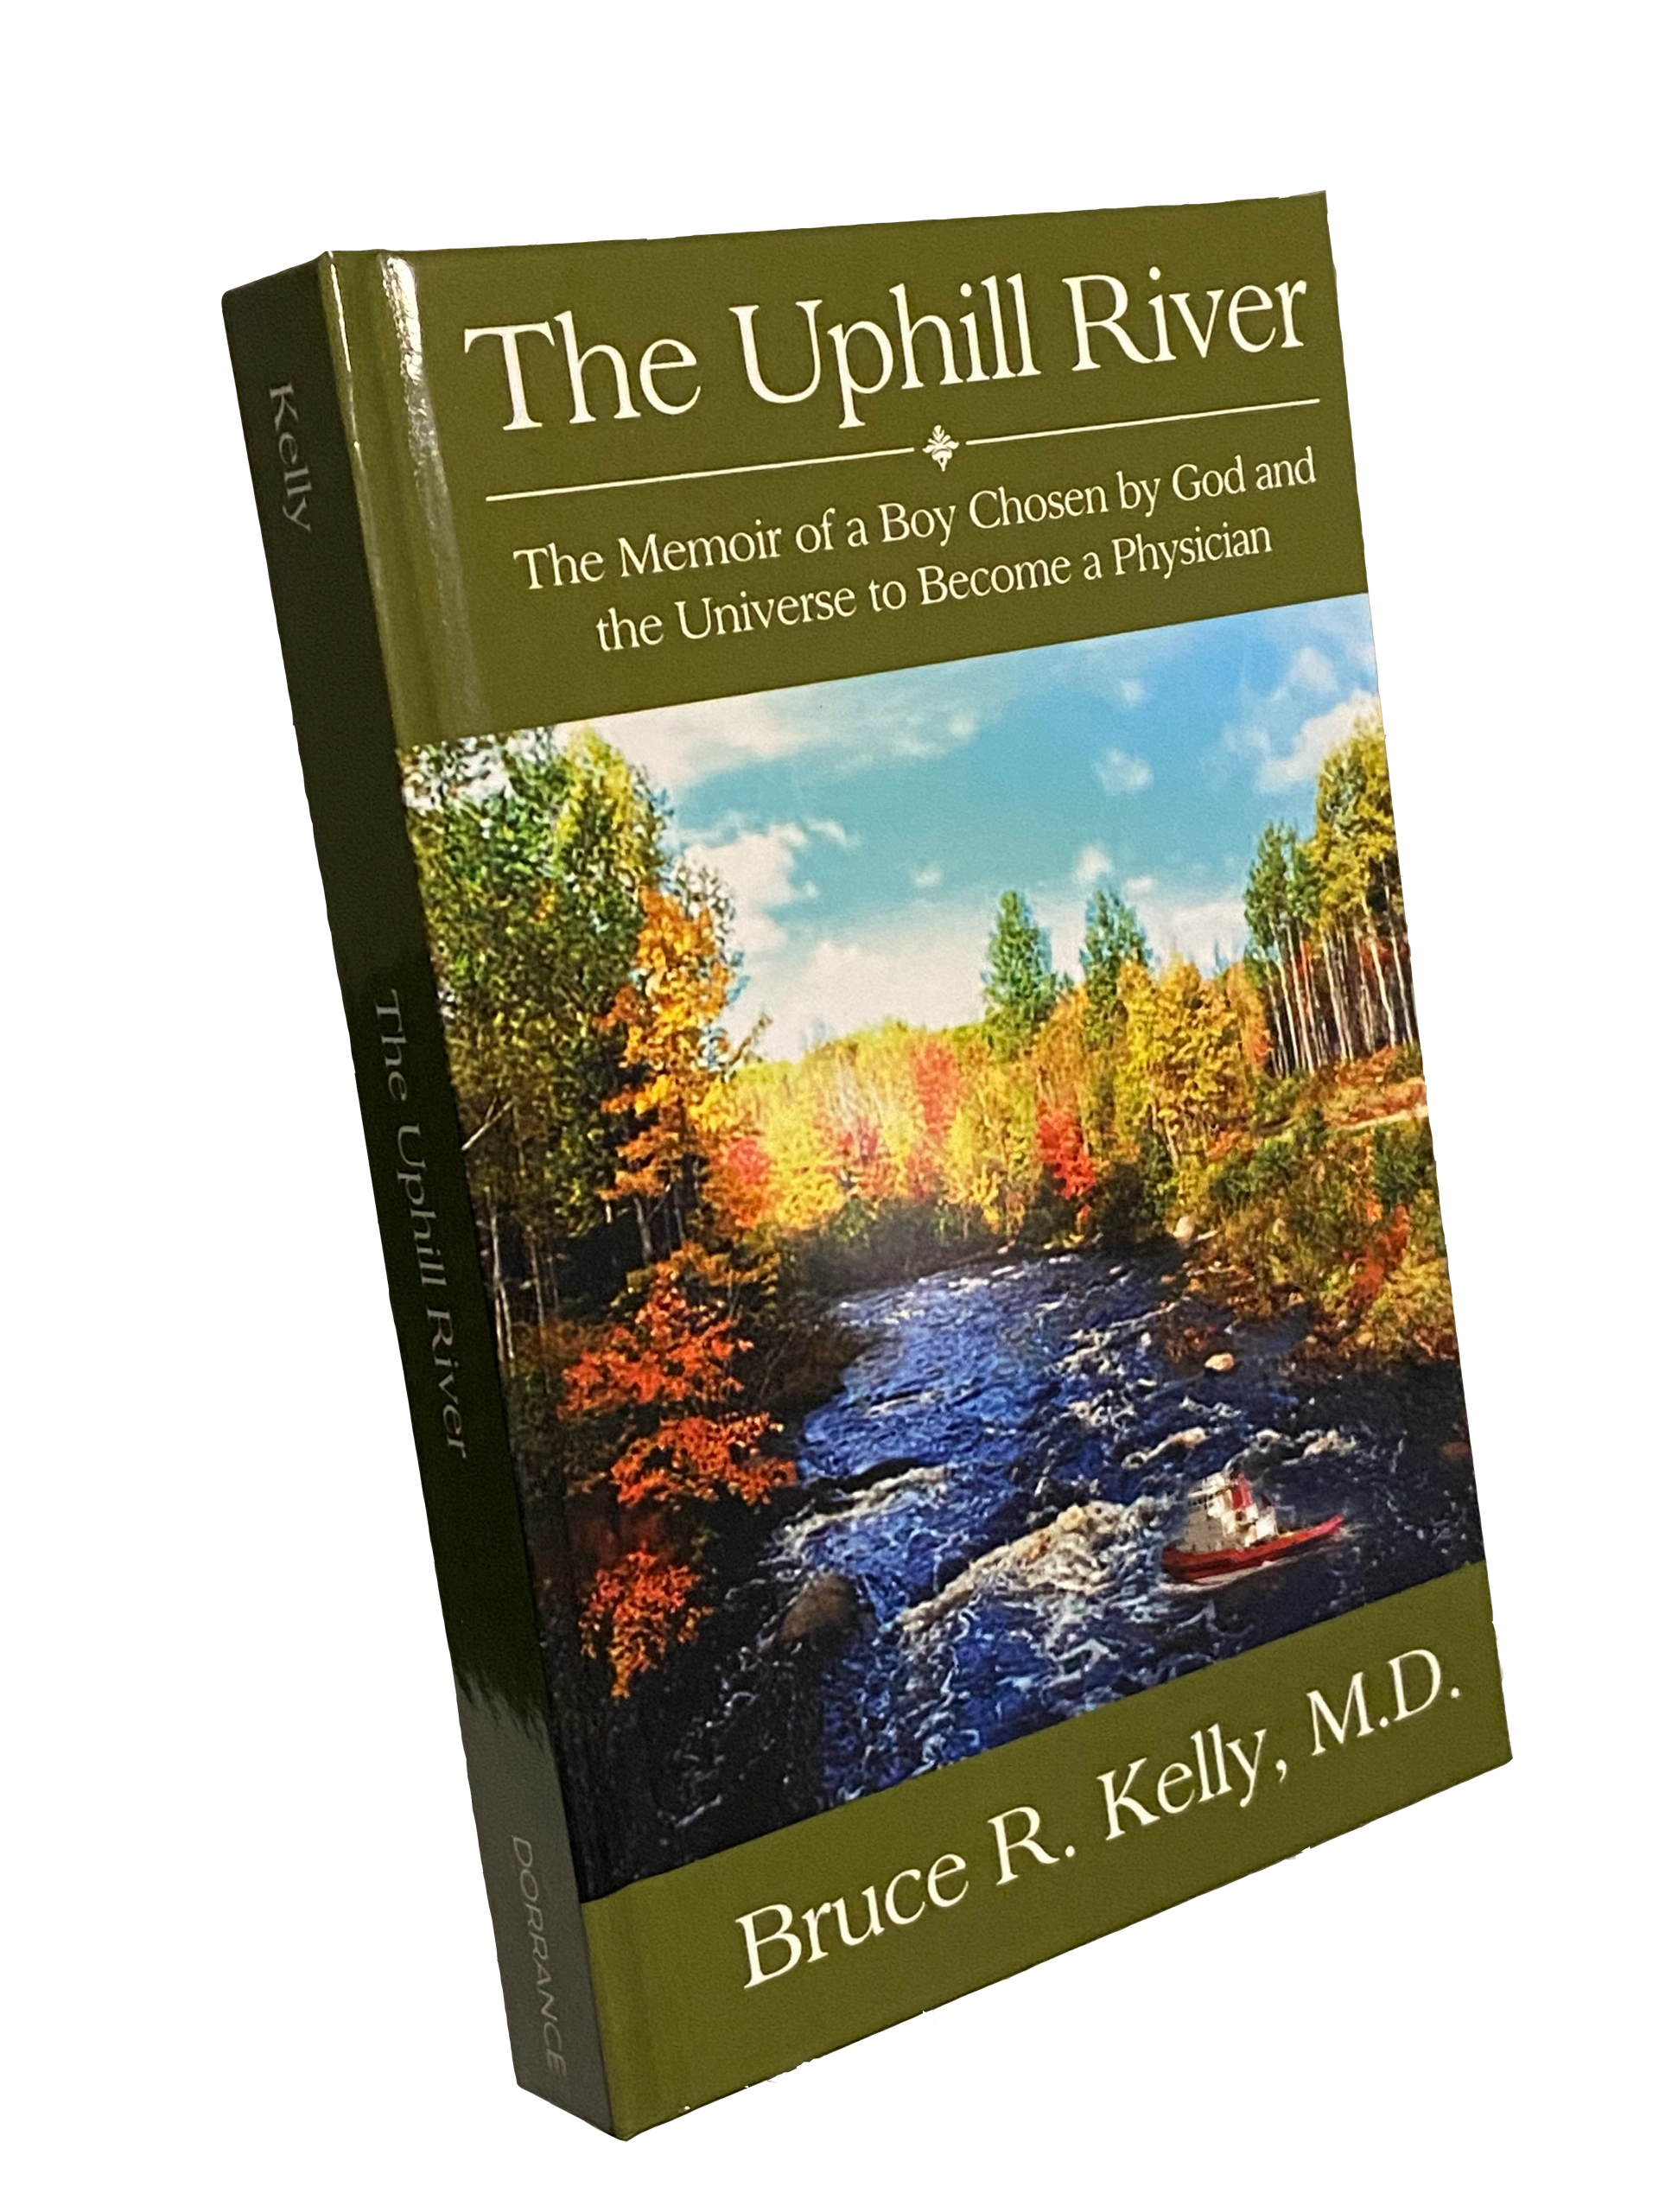 The Uphill River
Bruce R. Kelly, M.D.
Memoir
Physician
Inpatient Spinal Cord Rehabilitation Unit